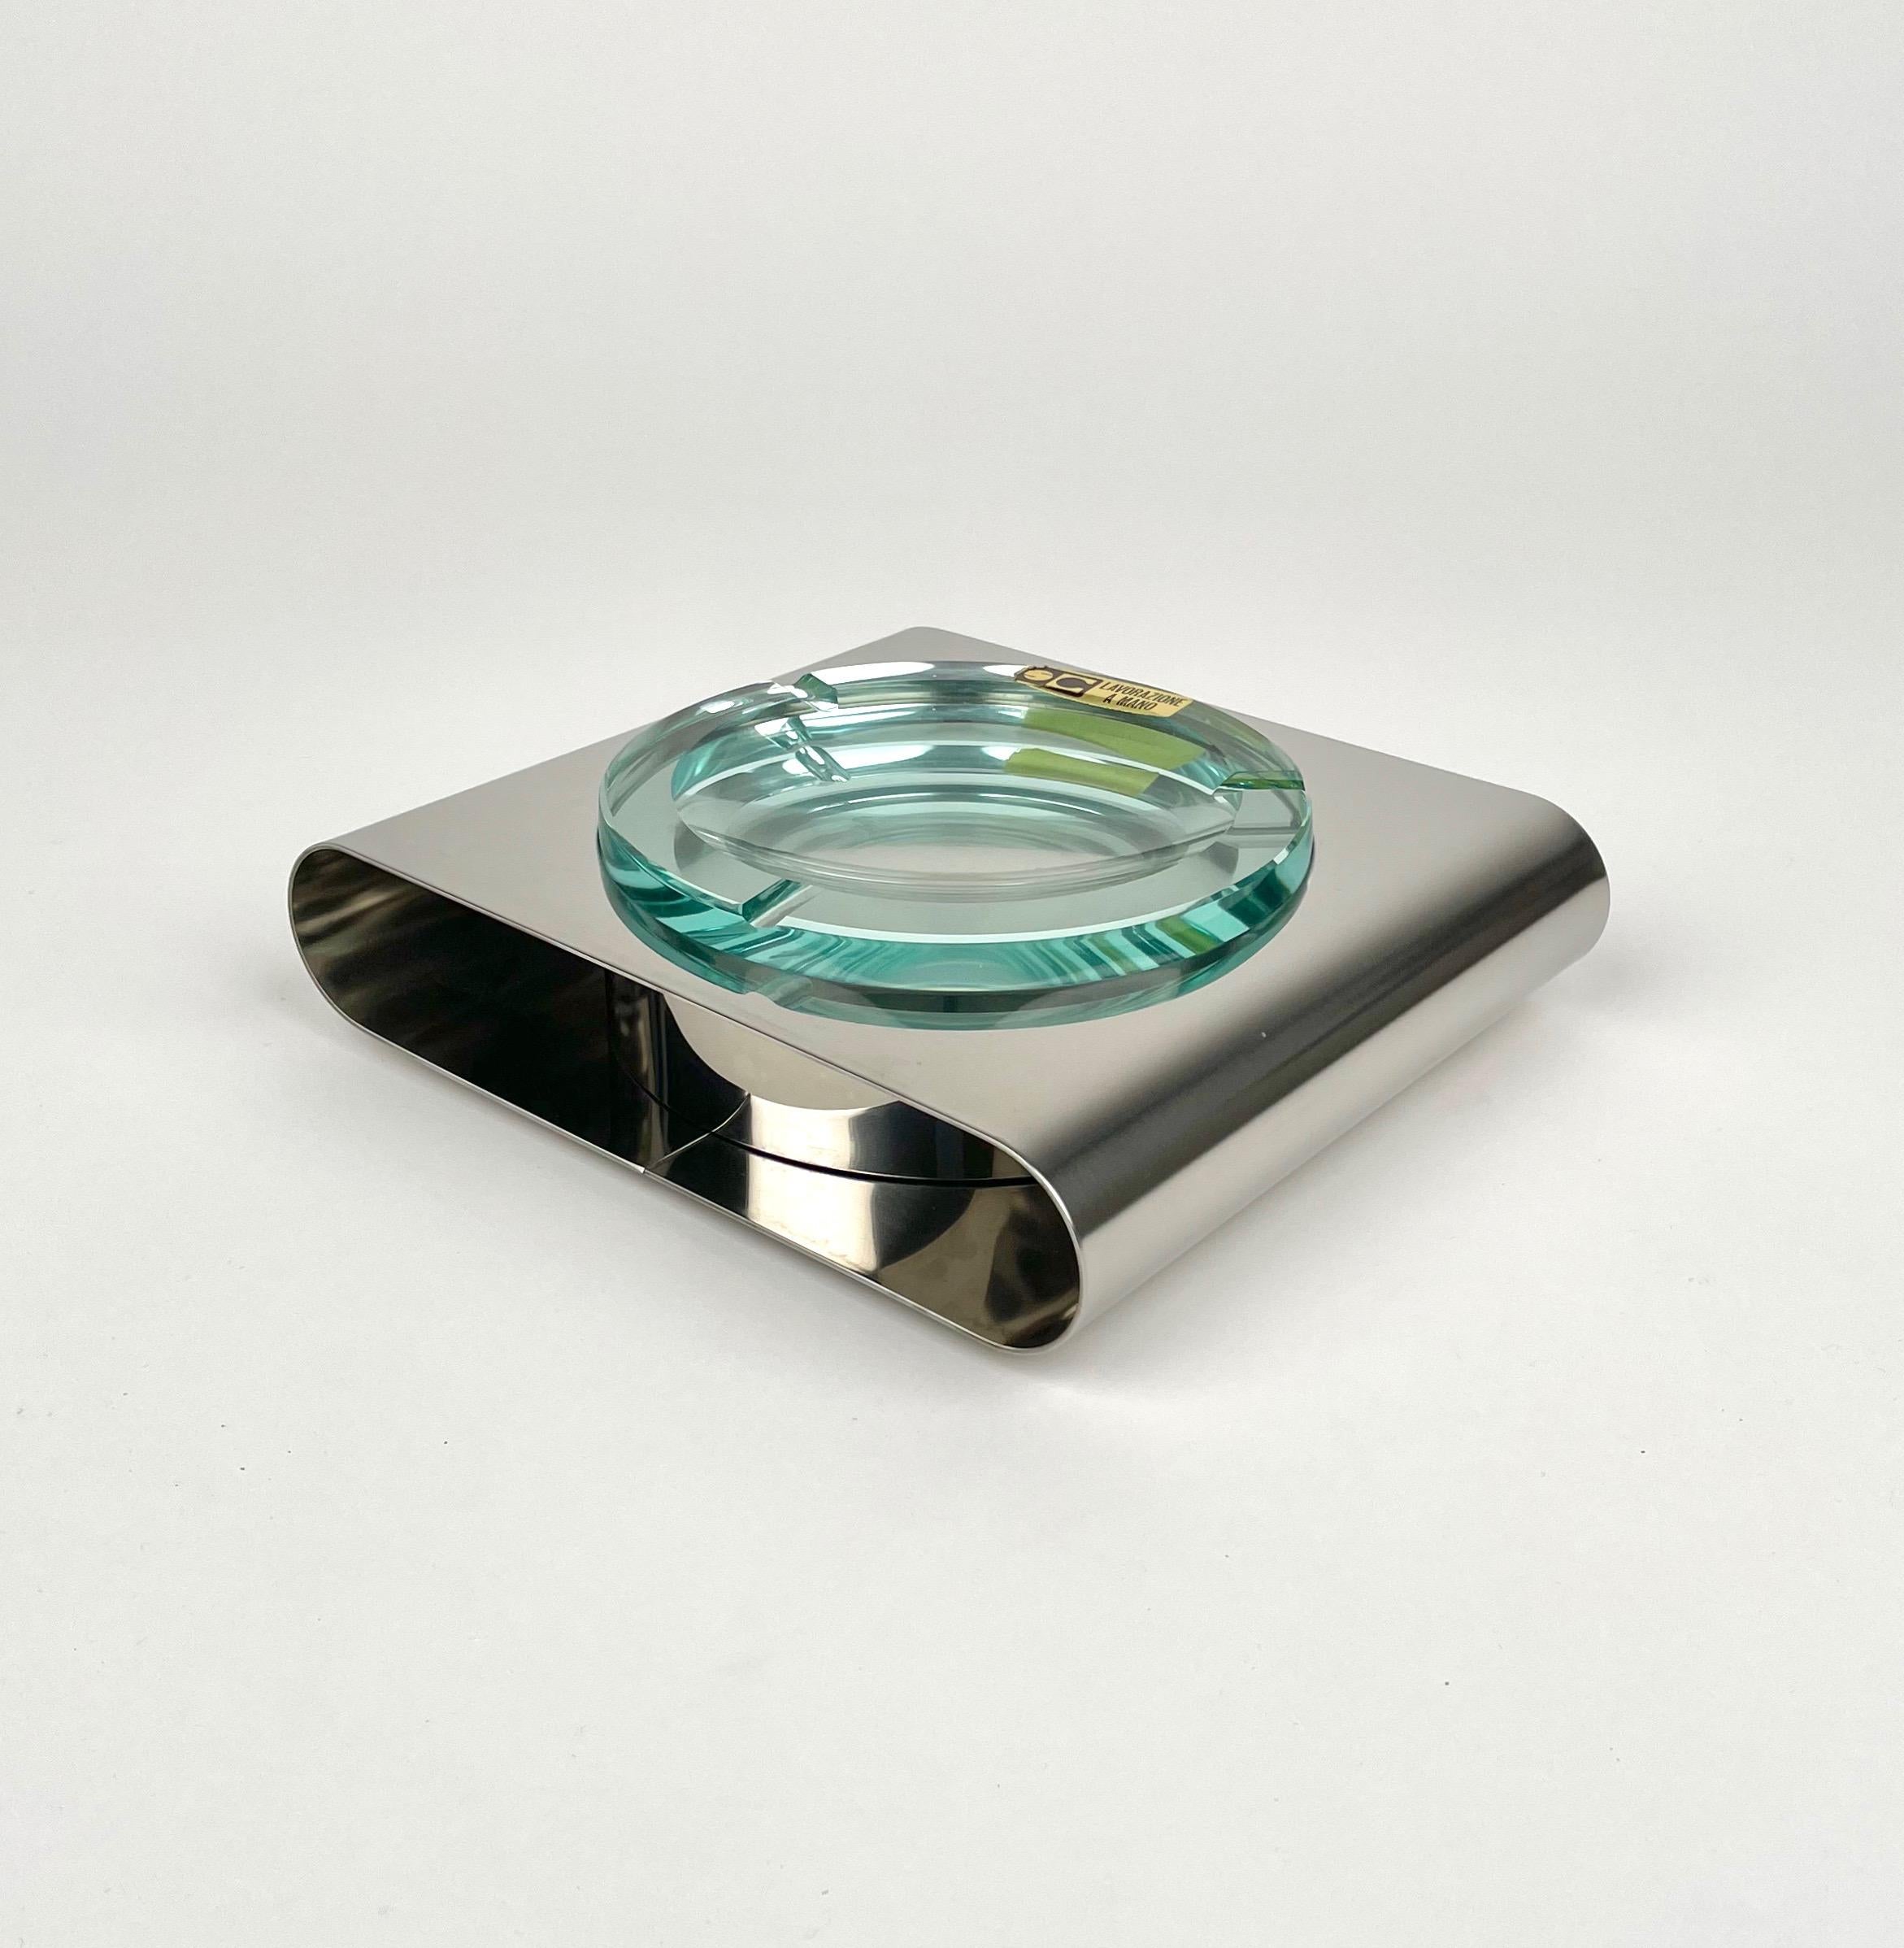 Ashtray Sena Cristal Steel and Green Glass, Italy, 1970s For Sale 2